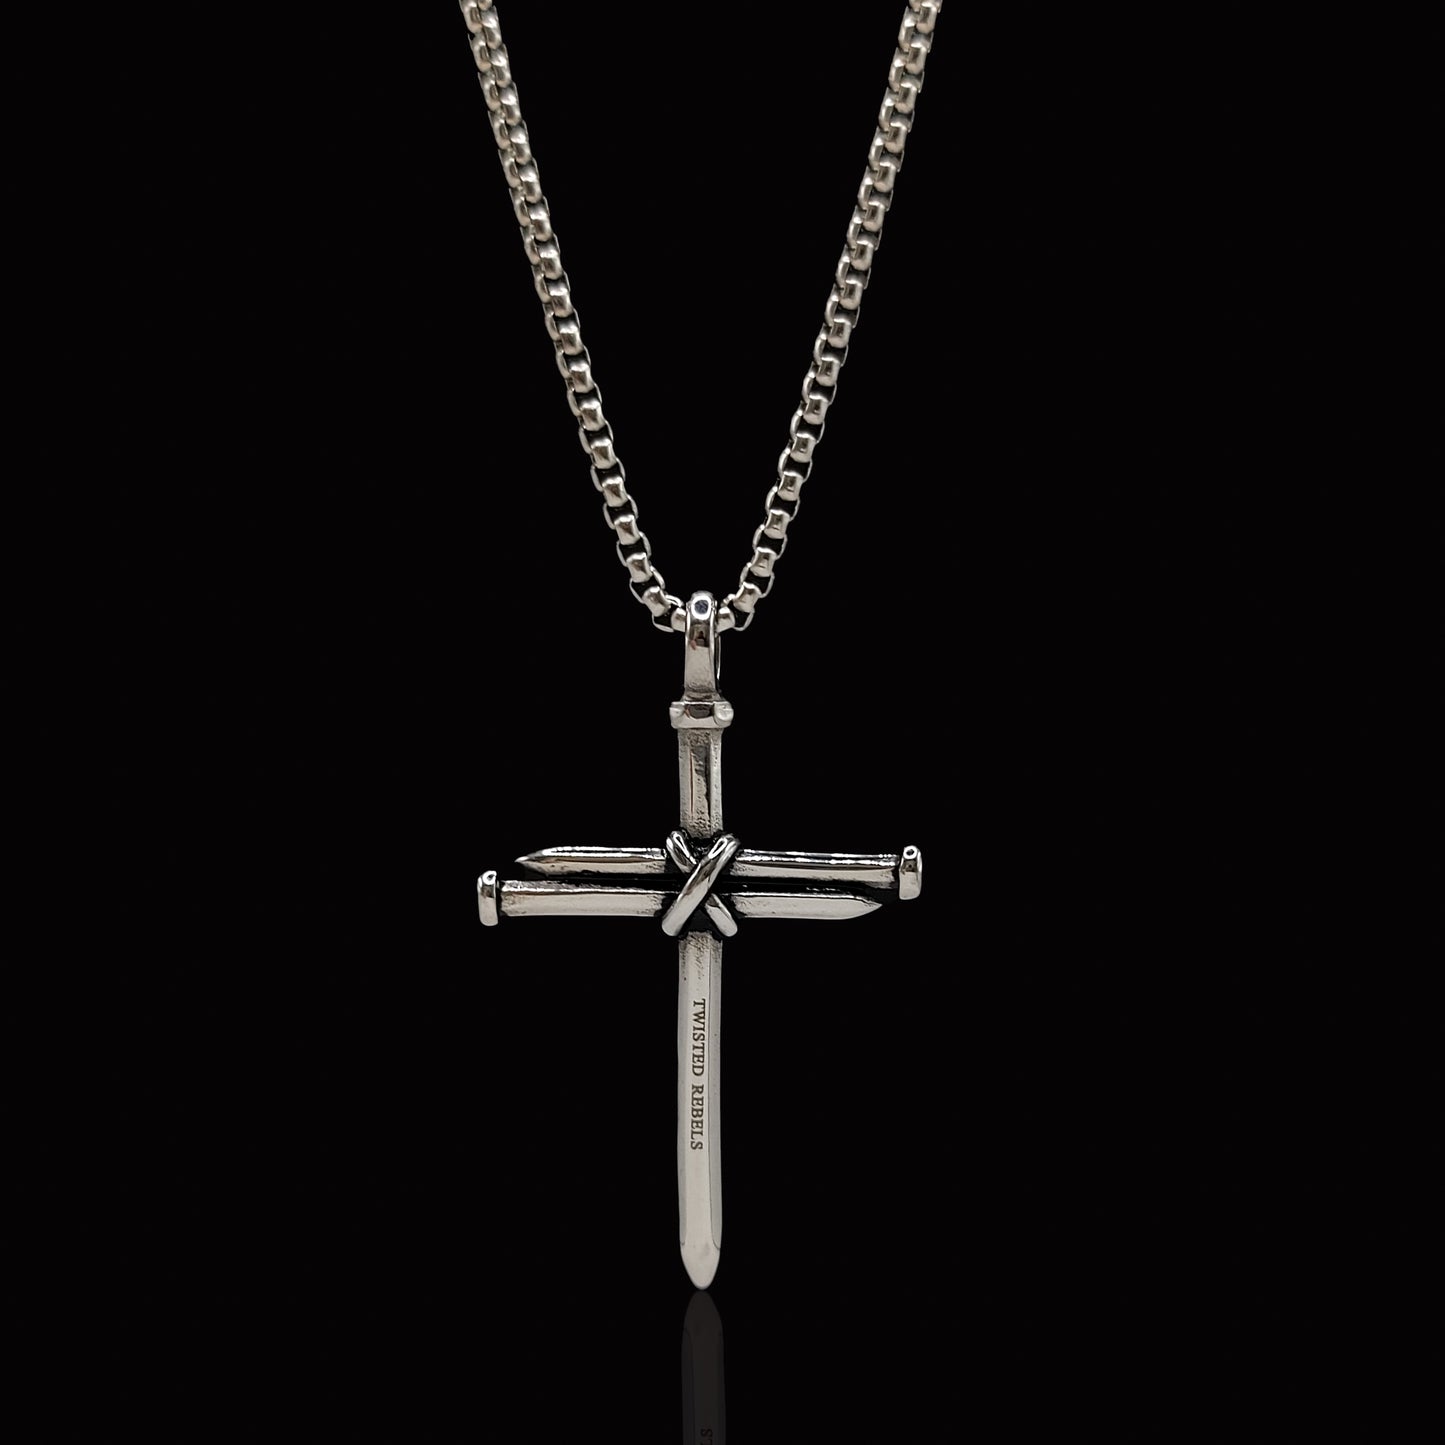 Twisted Rebels Nail Cross Branded & Rolo Chain 3.5mm - 60cm (Silver)